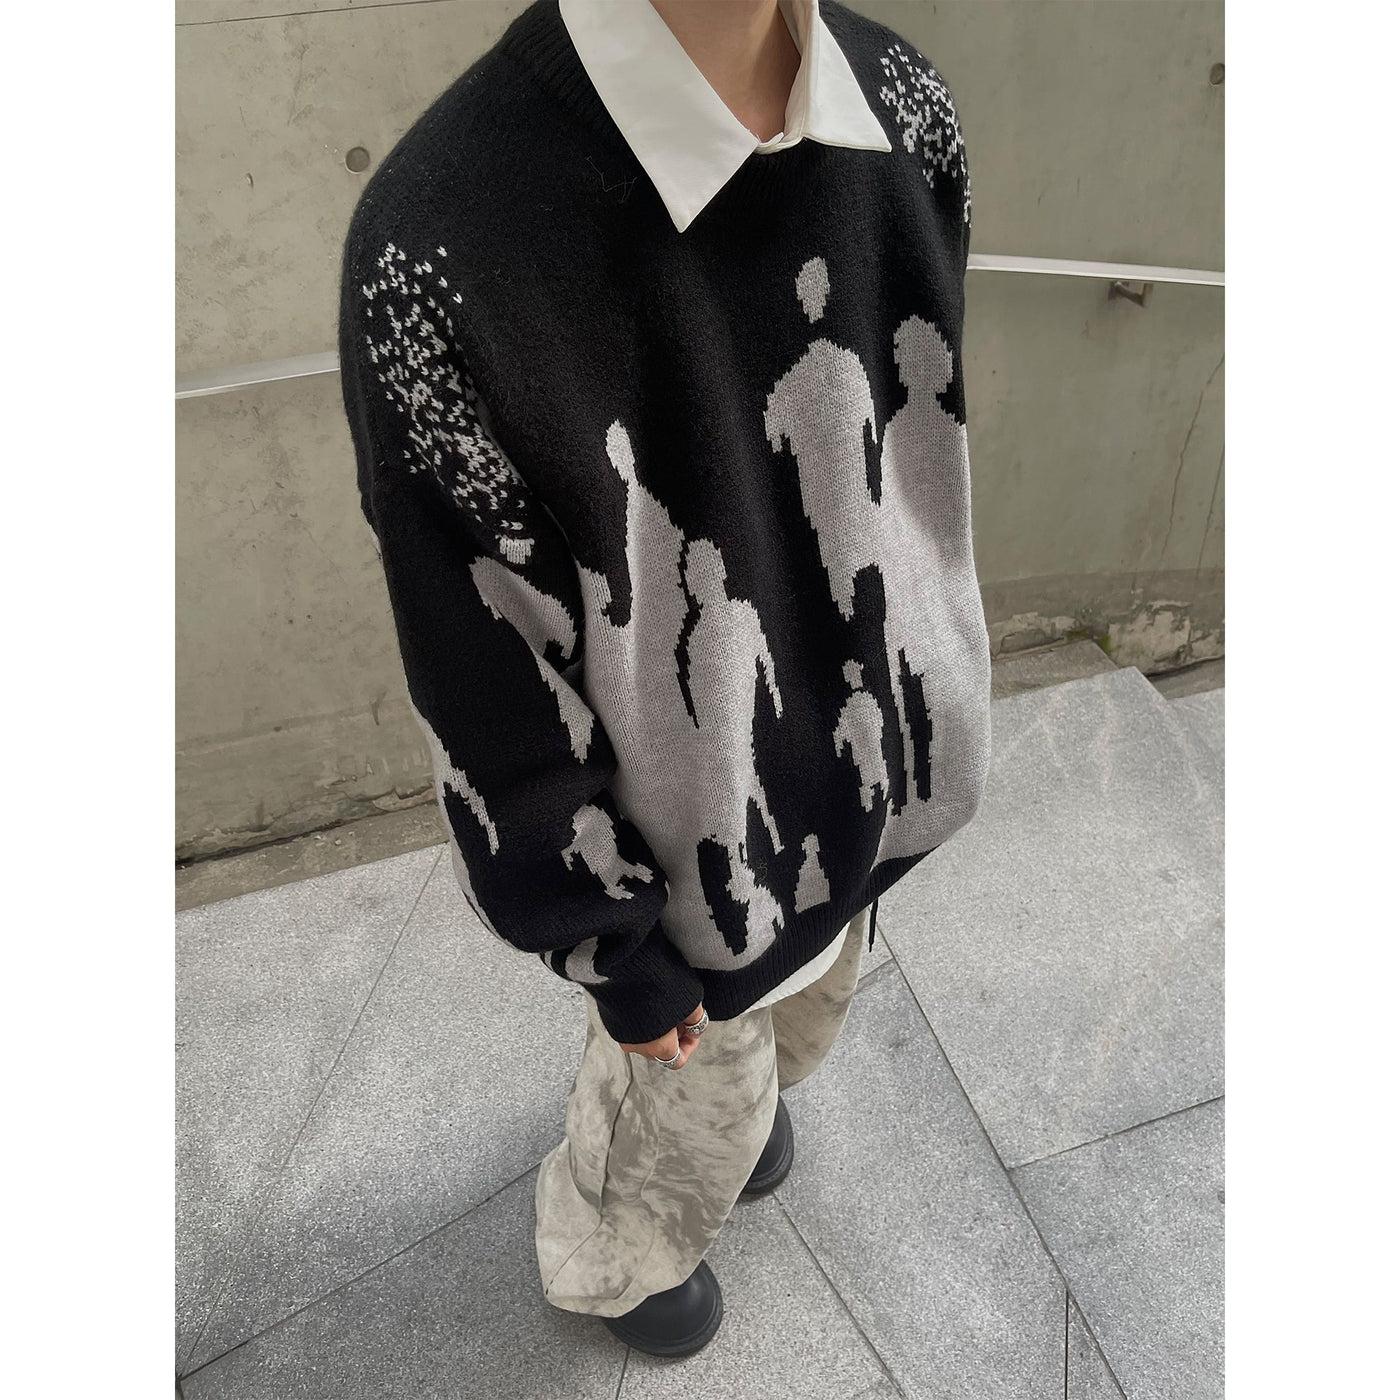 MaxDstr Casual Shadow Detailed Sweater Korean Street Fashion Sweater By MaxDstr Shop Online at OH Vault